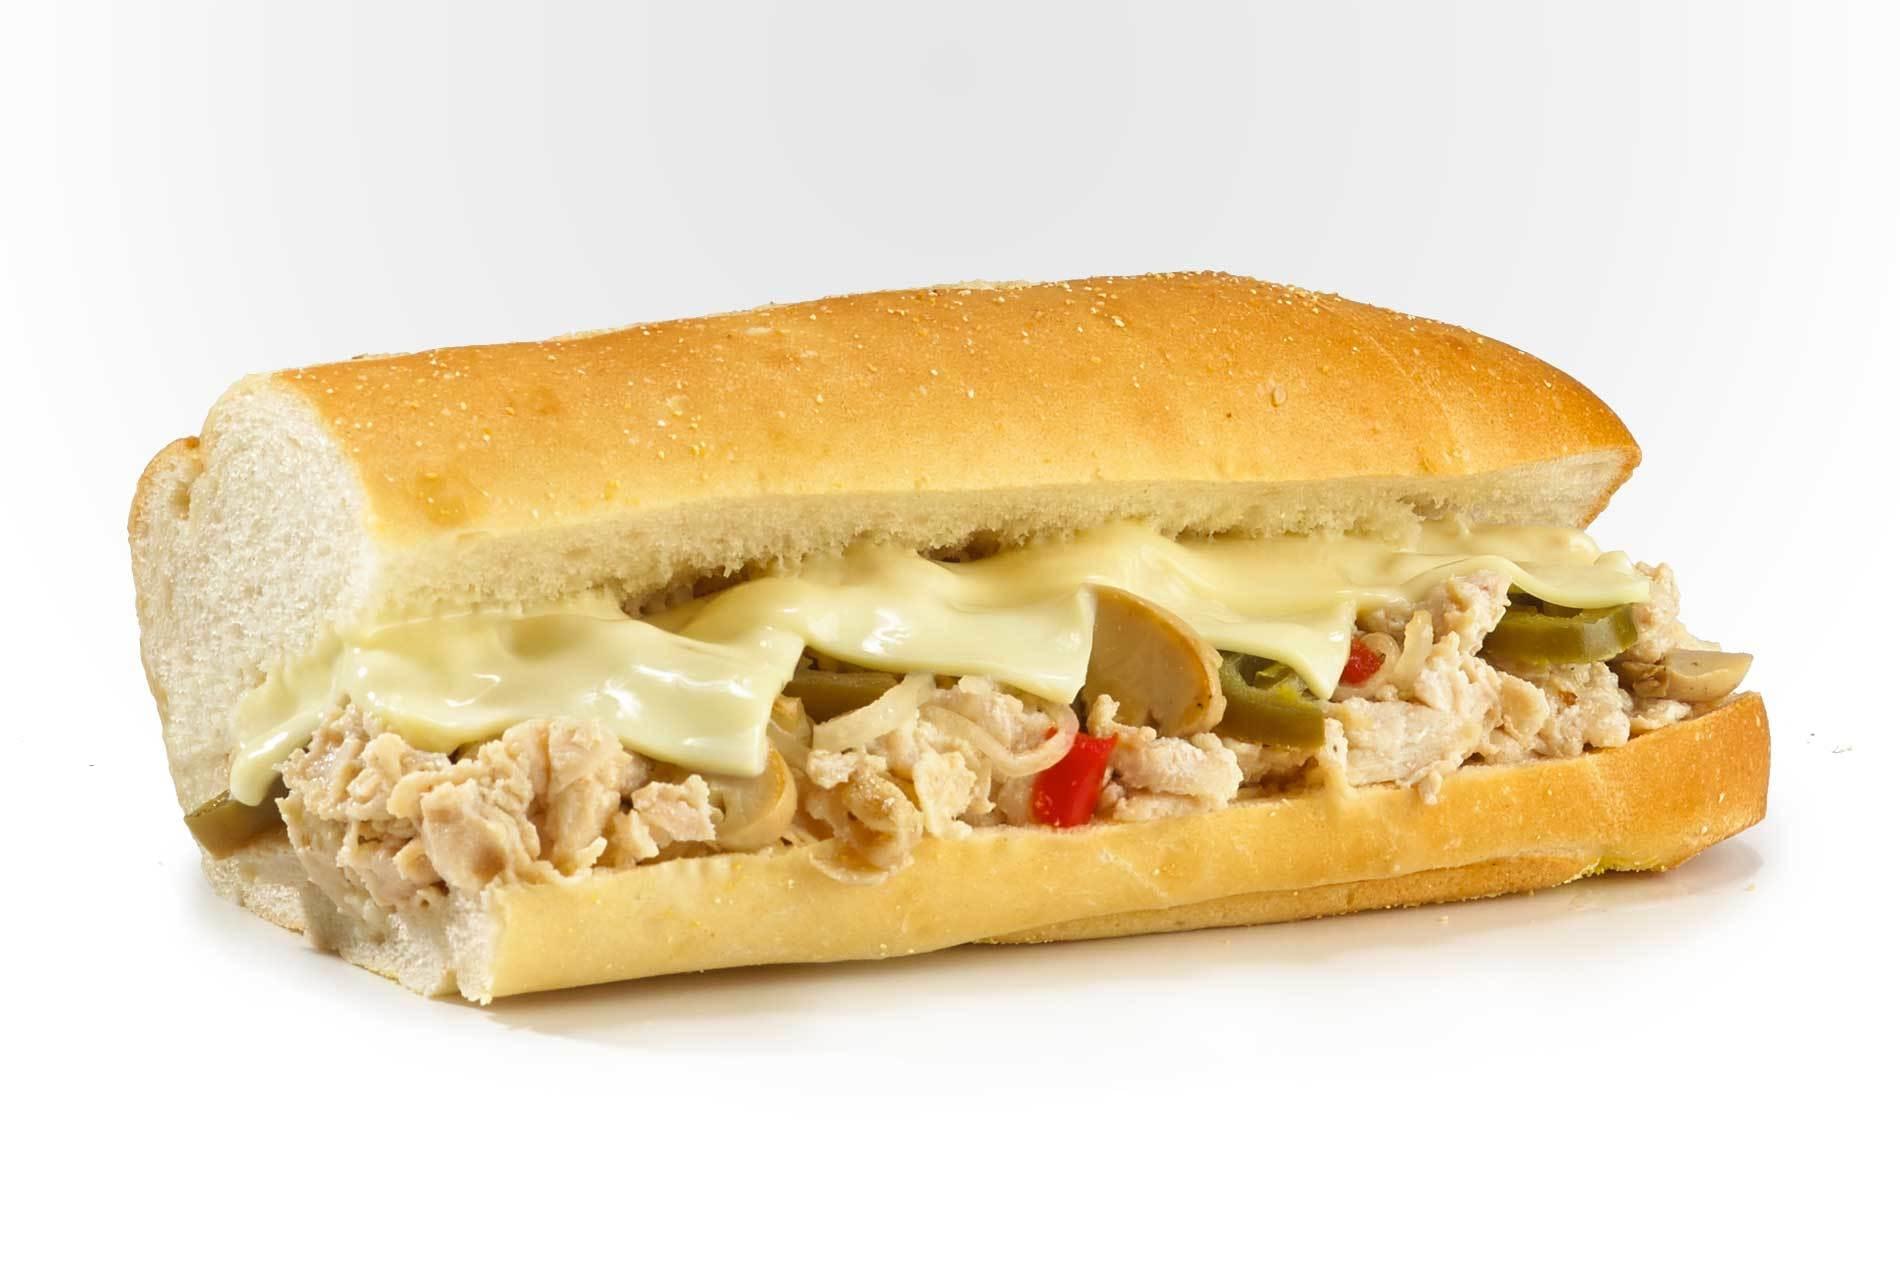 Jersey Mike's Big Kahuna Chicken Cheese Steak Nutrition Facts